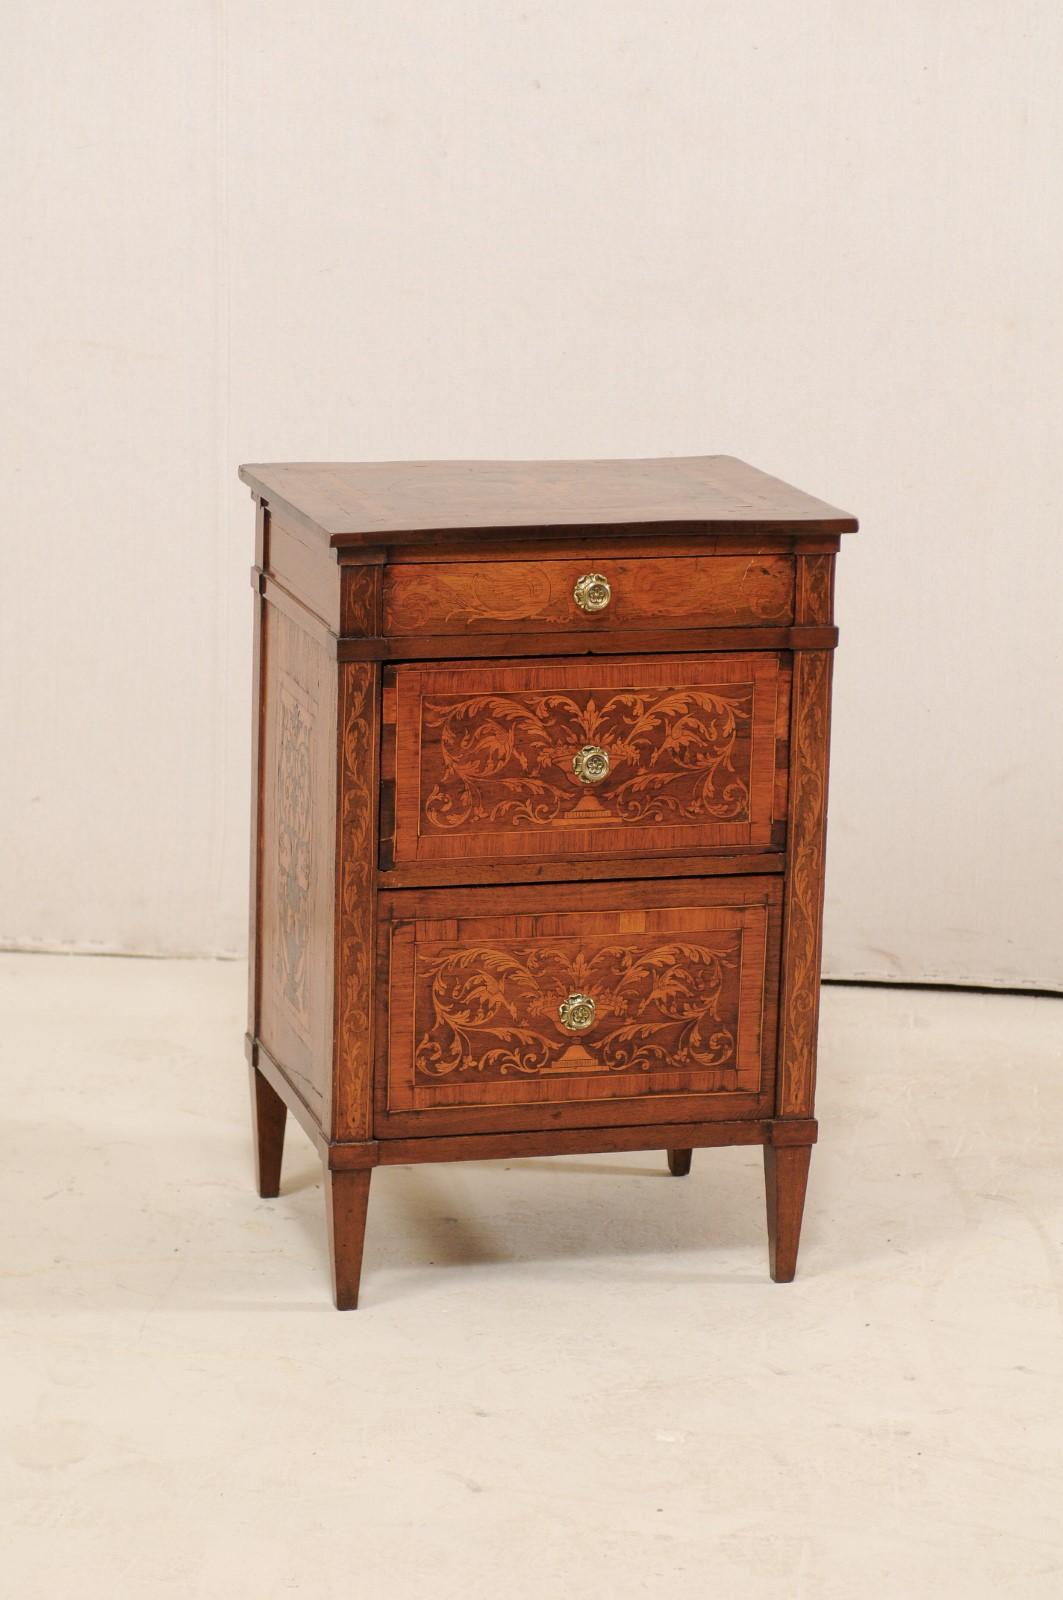 An Italian small-sized neoclassical commode with refined decorative inlay from the early 19th century. This antique chest from Italy is decorated at top, front side post, three drawer fronts and each side with beautiful banding and elegantly inlaid